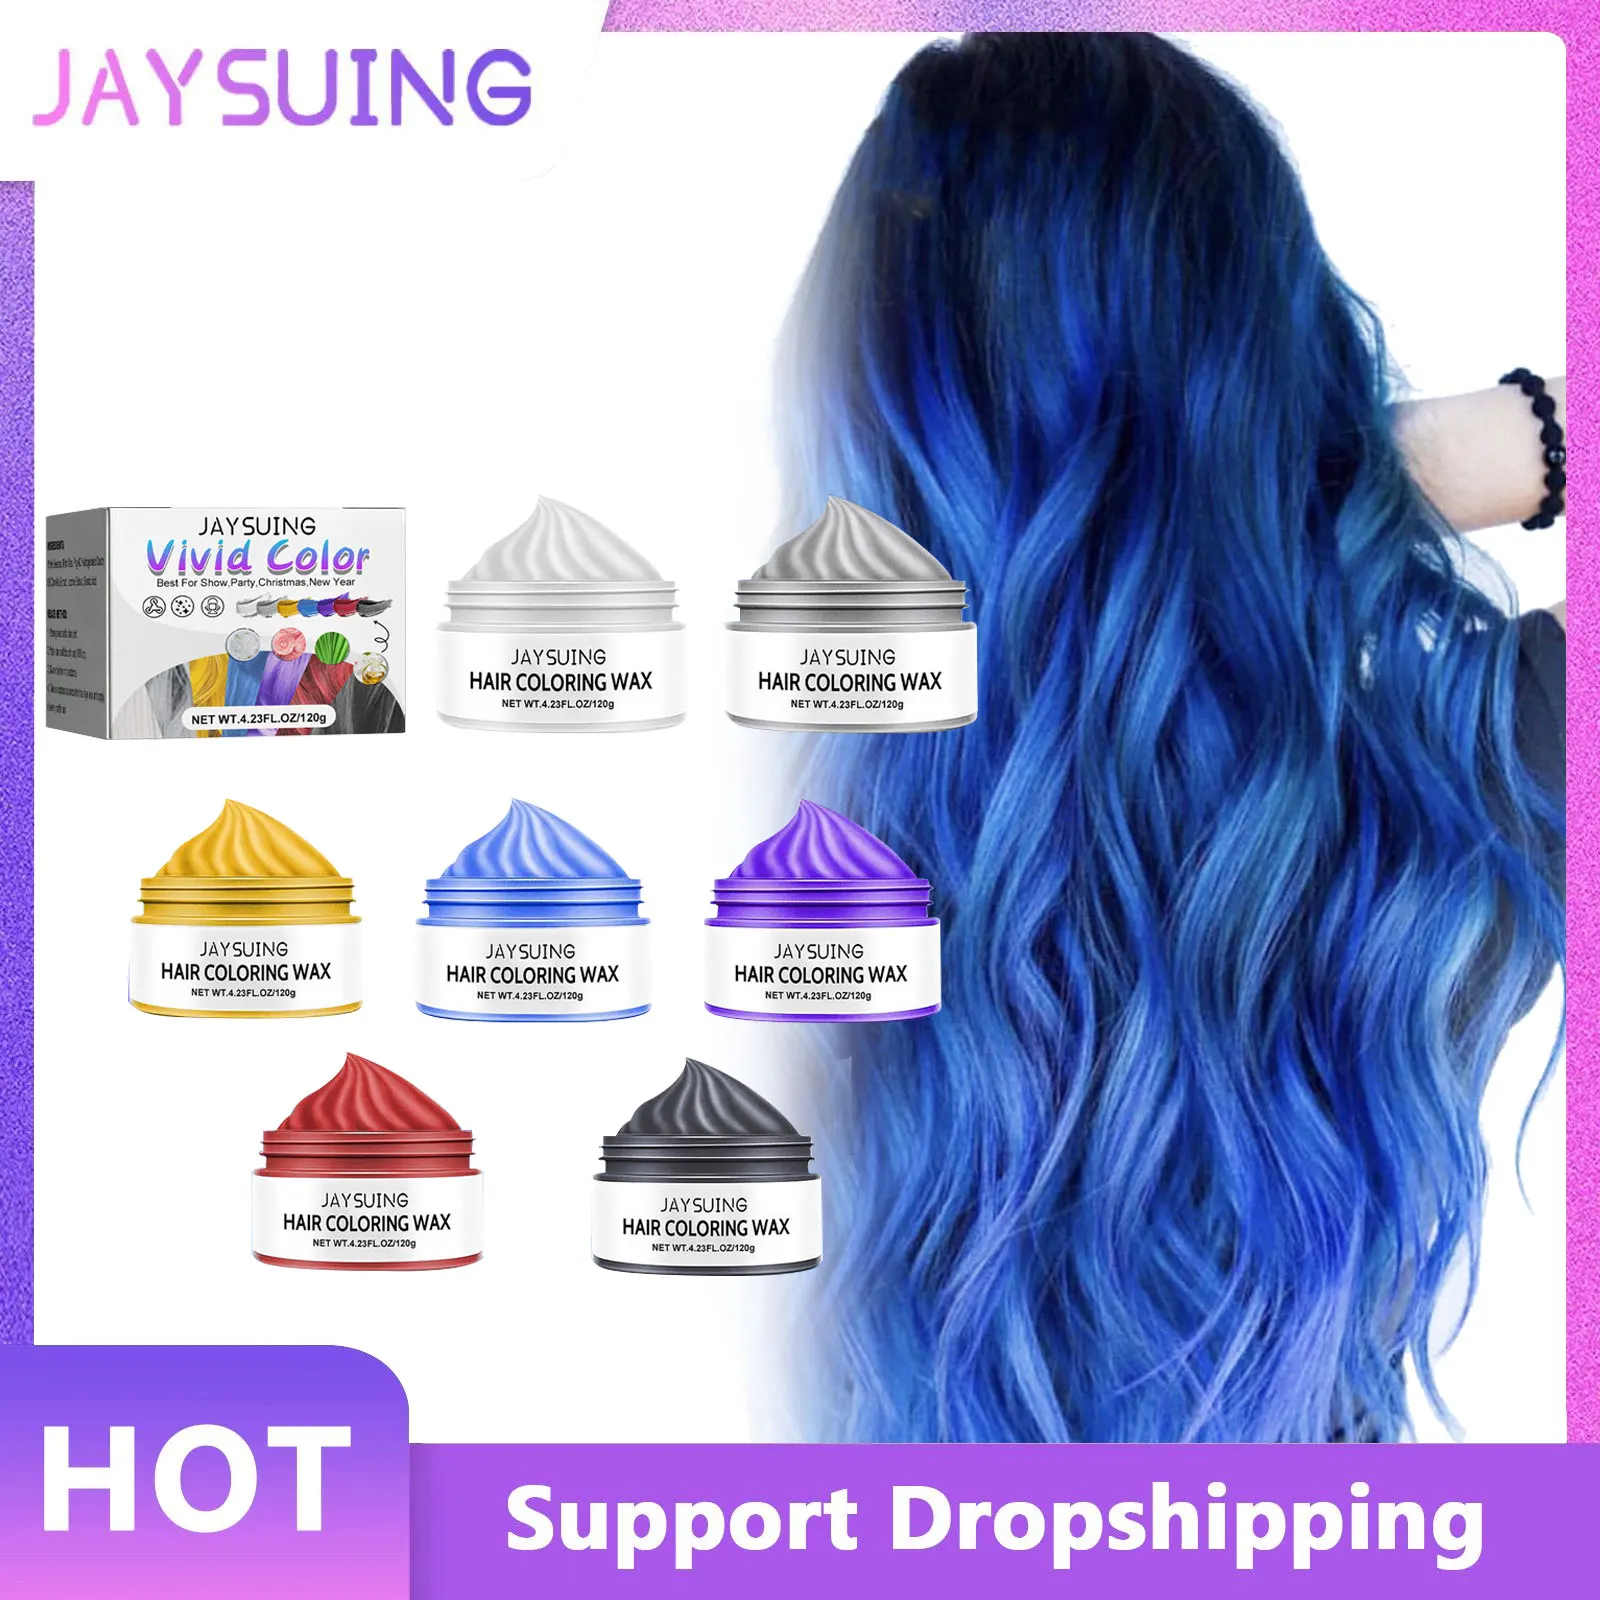 Hair Coloring Wax Unisex Fashion Temporary Color Dye Washable Cosplay Party Makeup Mud Hair Coloring Styling Pomade 7 Colors